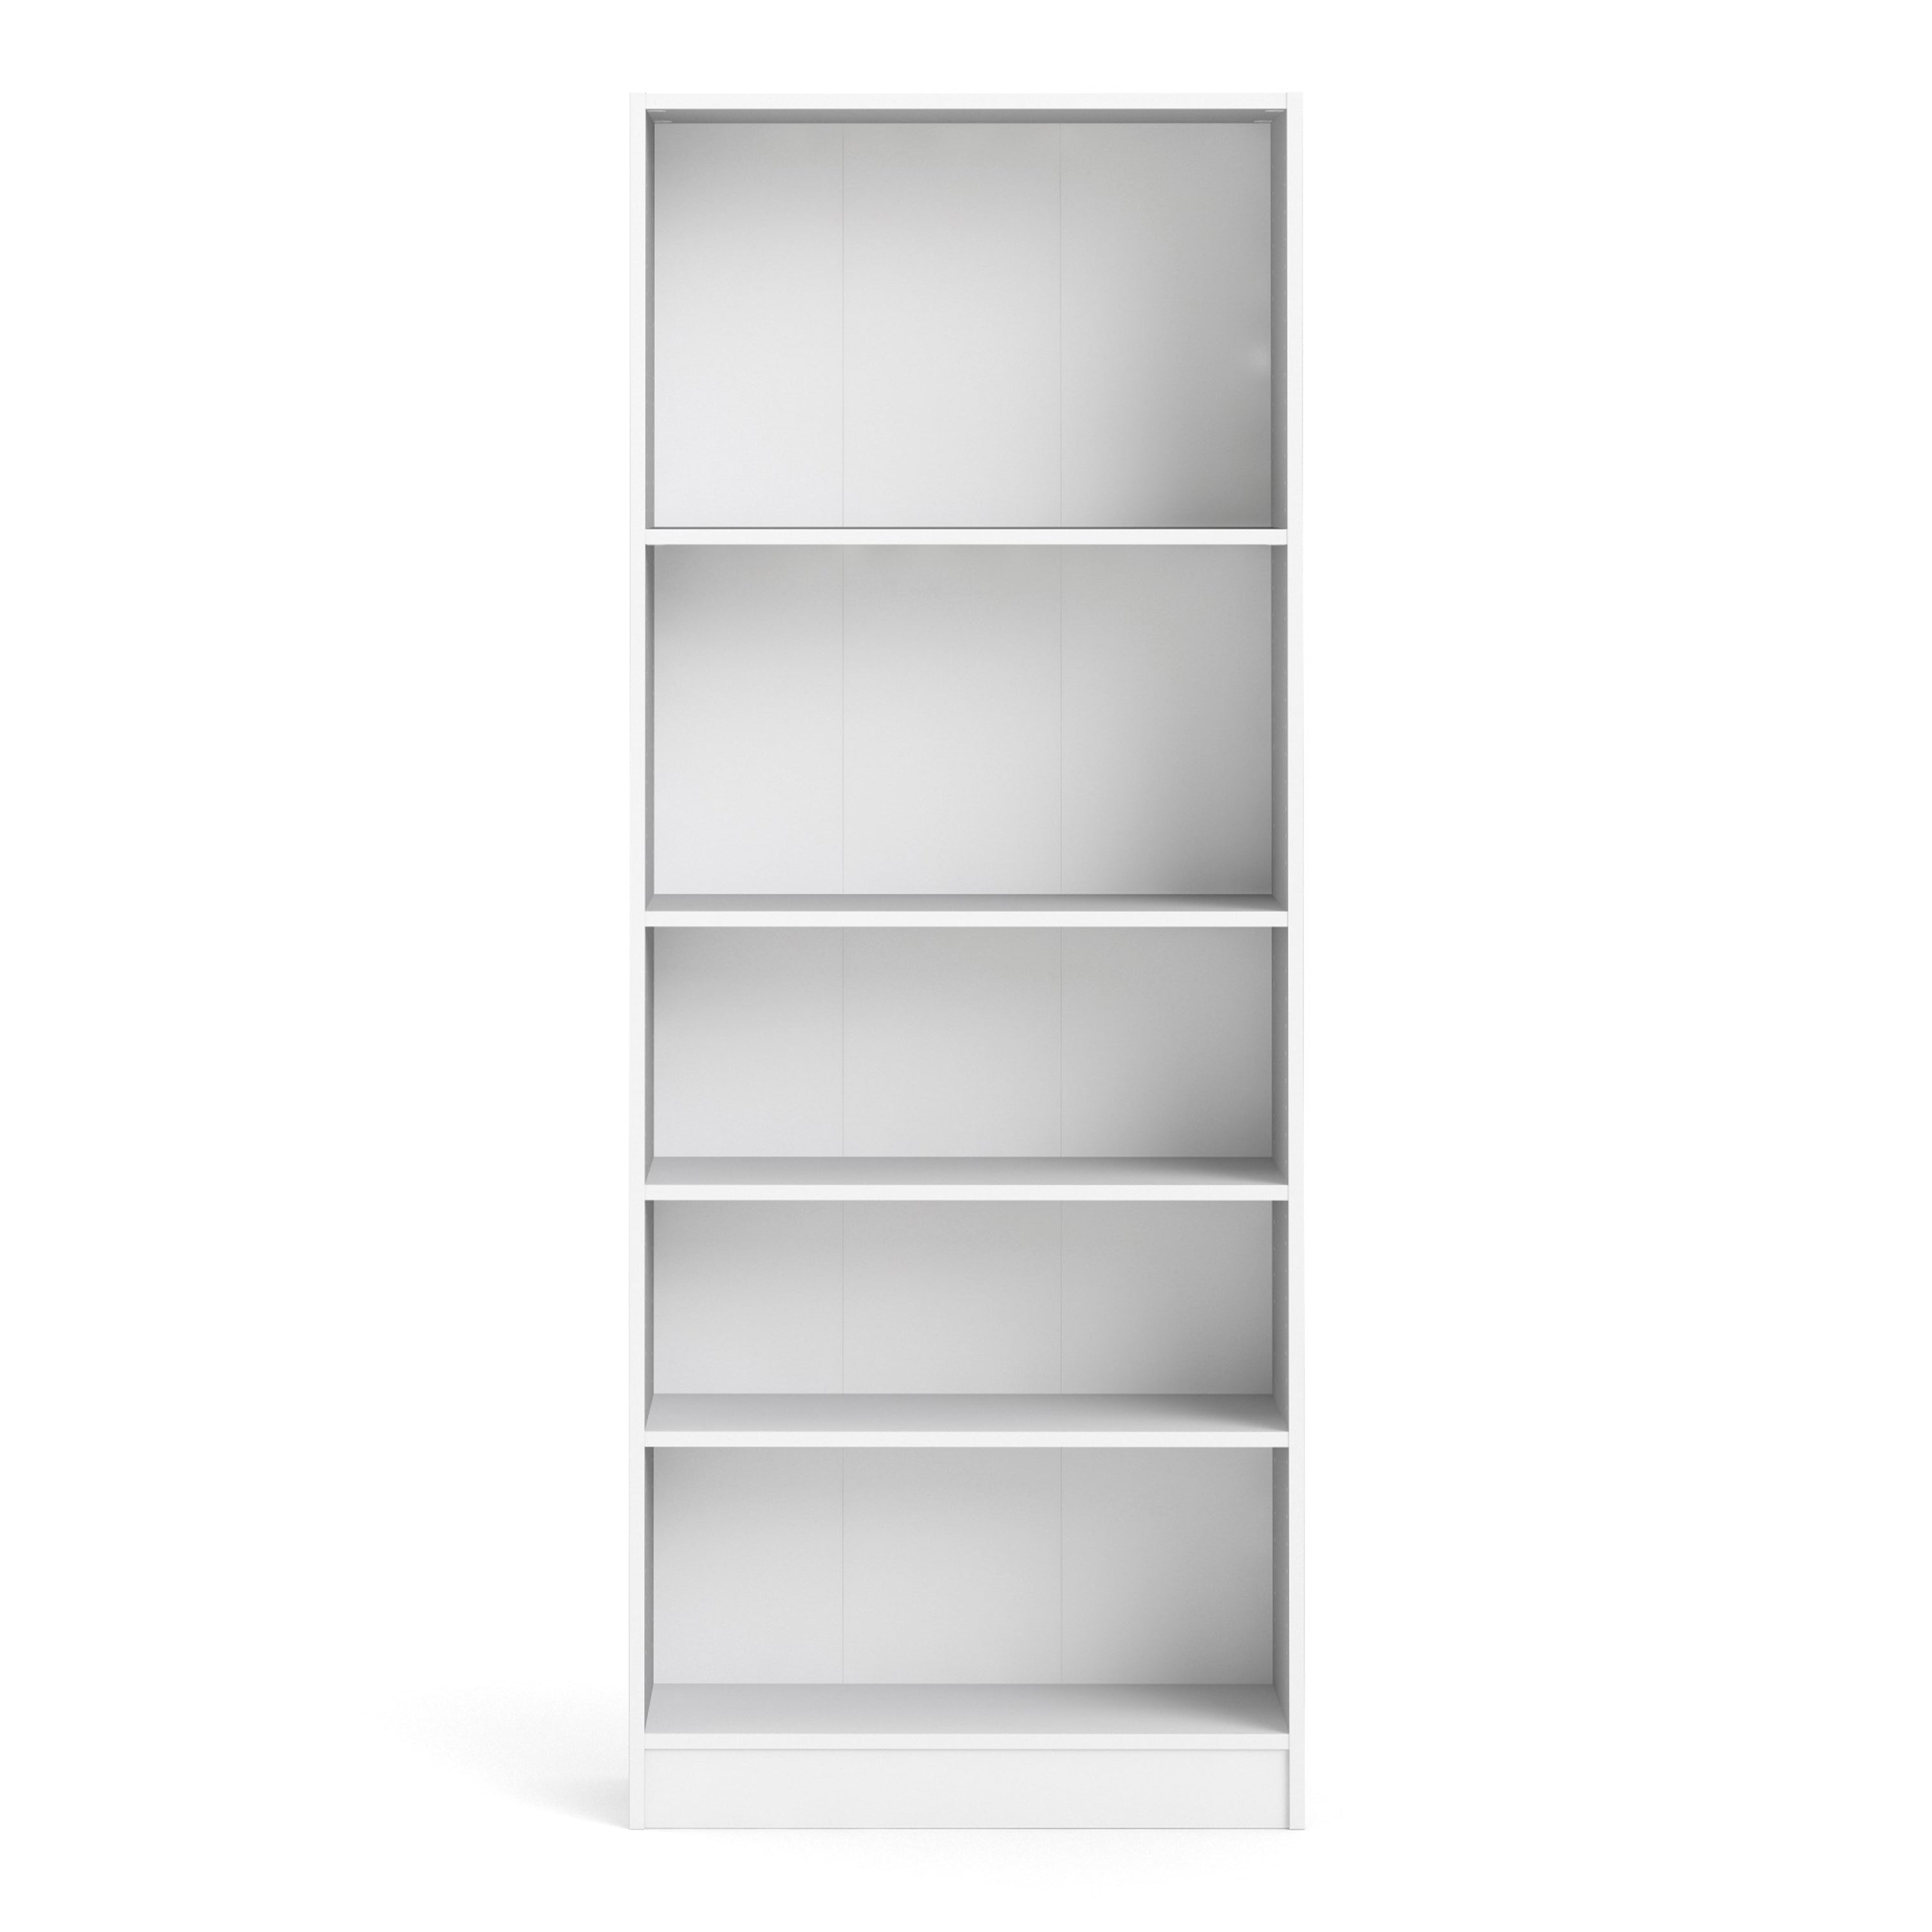 Basic Tall Wide Bookcase (4 Shelves) in White